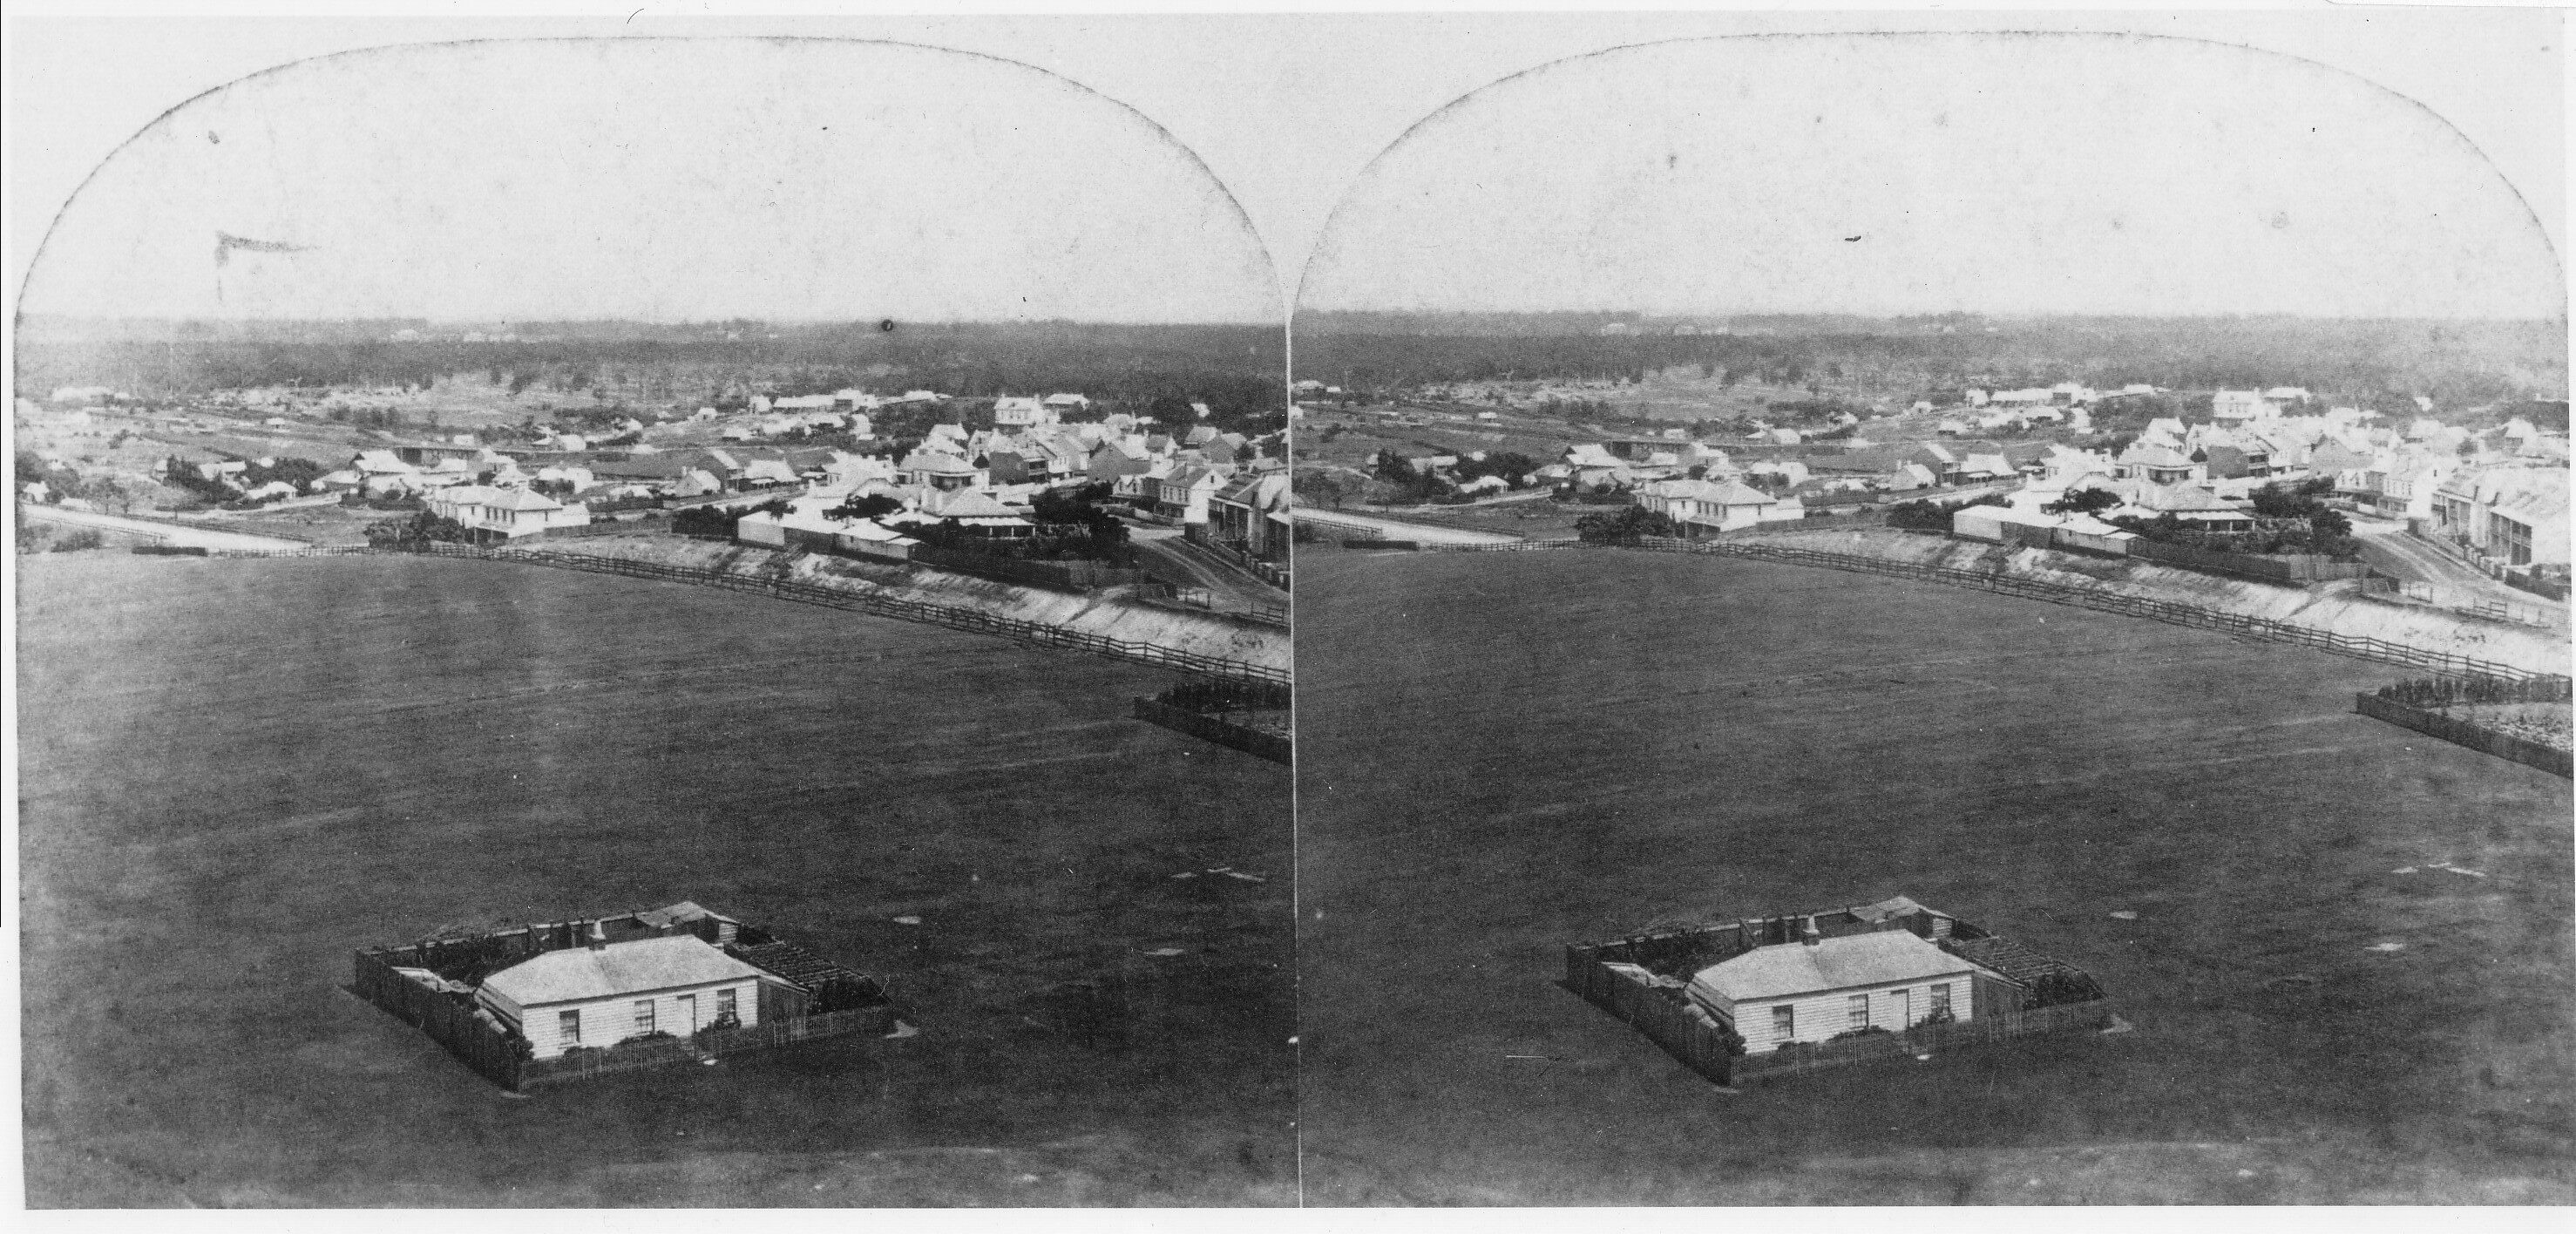 STEREO VIEW FROM CLOCK TOWER TO NORTH-WEST